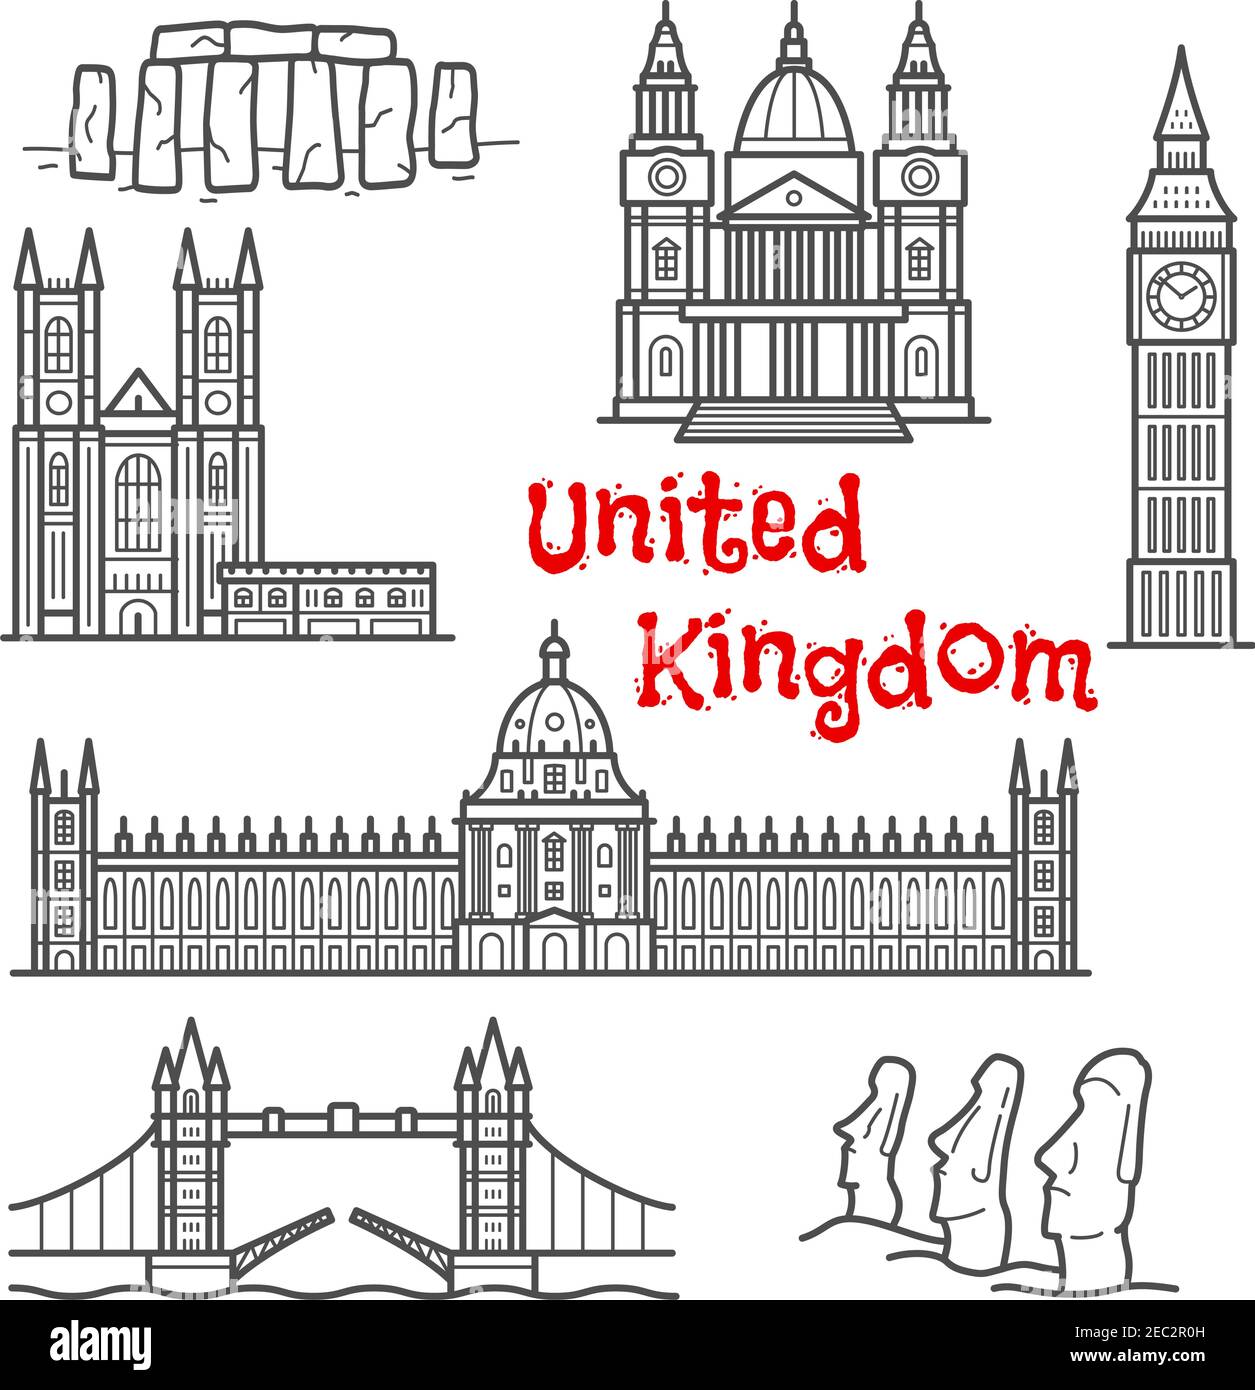 British and chilean architecture landmarks and historical attractions isolated sketch icons with Big Ben, Tower Bridge, Stonehenge, moai stone figures Stock Vector